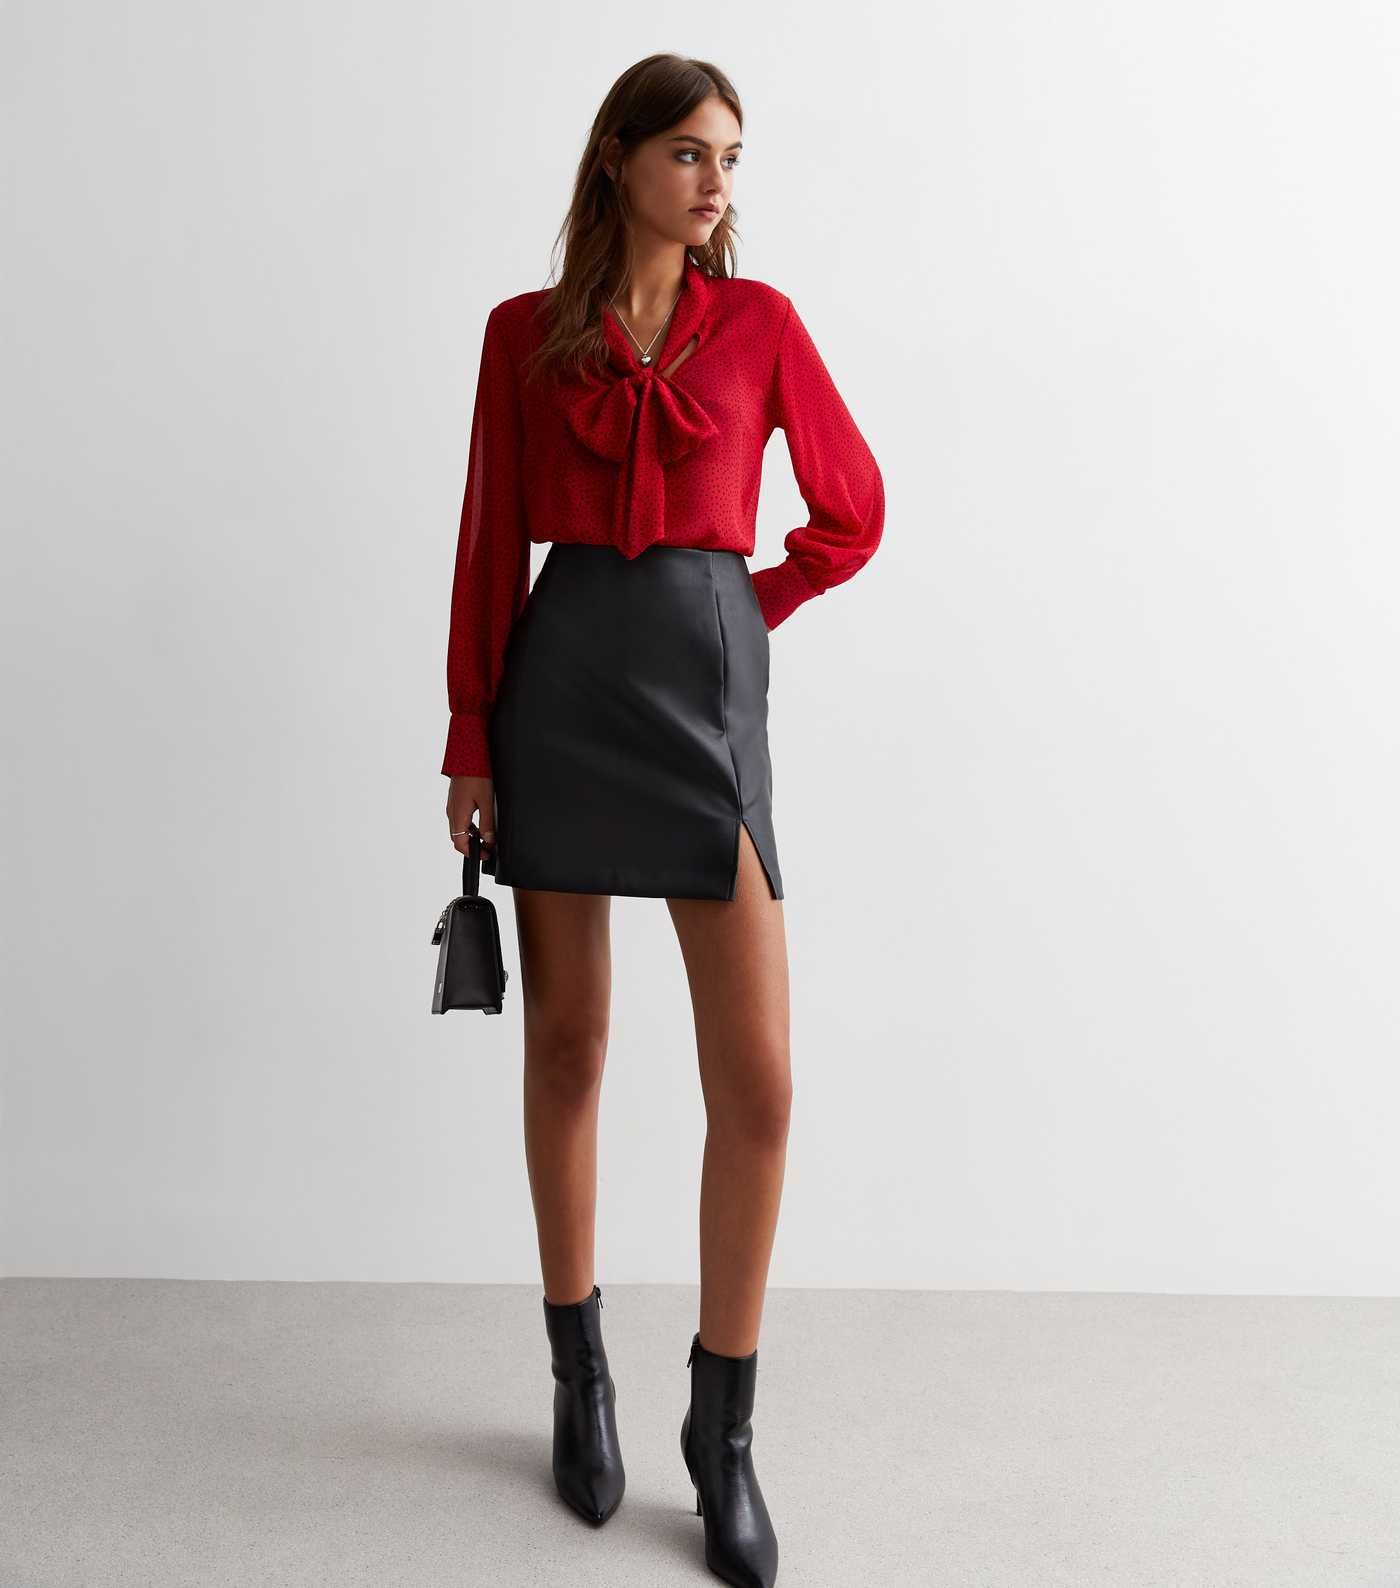 Black Leather-Look Split Hem Mini Skirt
						
						Add to Saved Items
						Remove from Saved I... | New Look (UK)